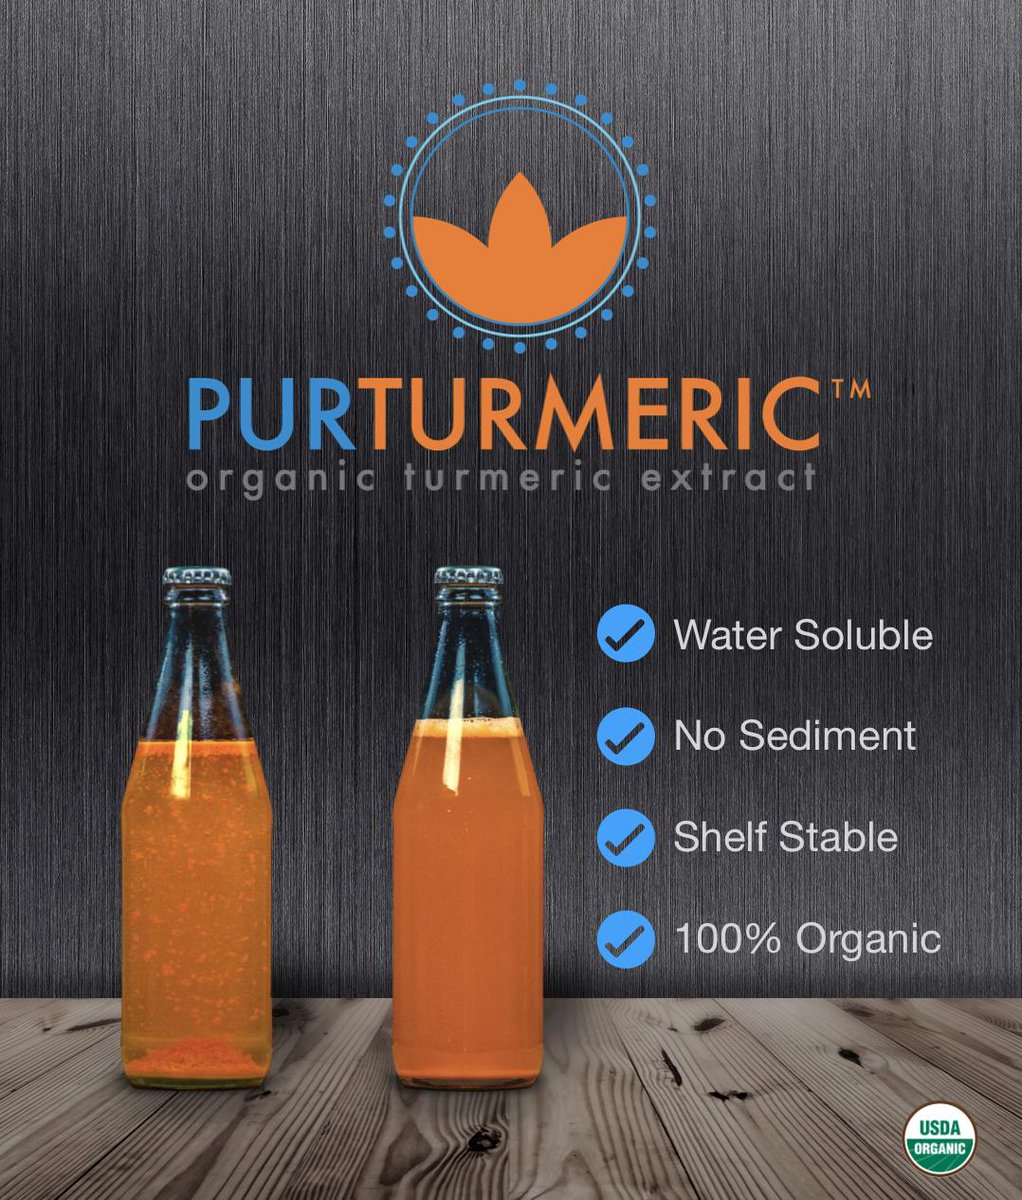 Which turmeric ingredient would you rather use in your beverage?
See more: bit.ly/2plW8fO

#Turmeric #IFT19 #IFT #SSEexpo #organic #BevNETLive